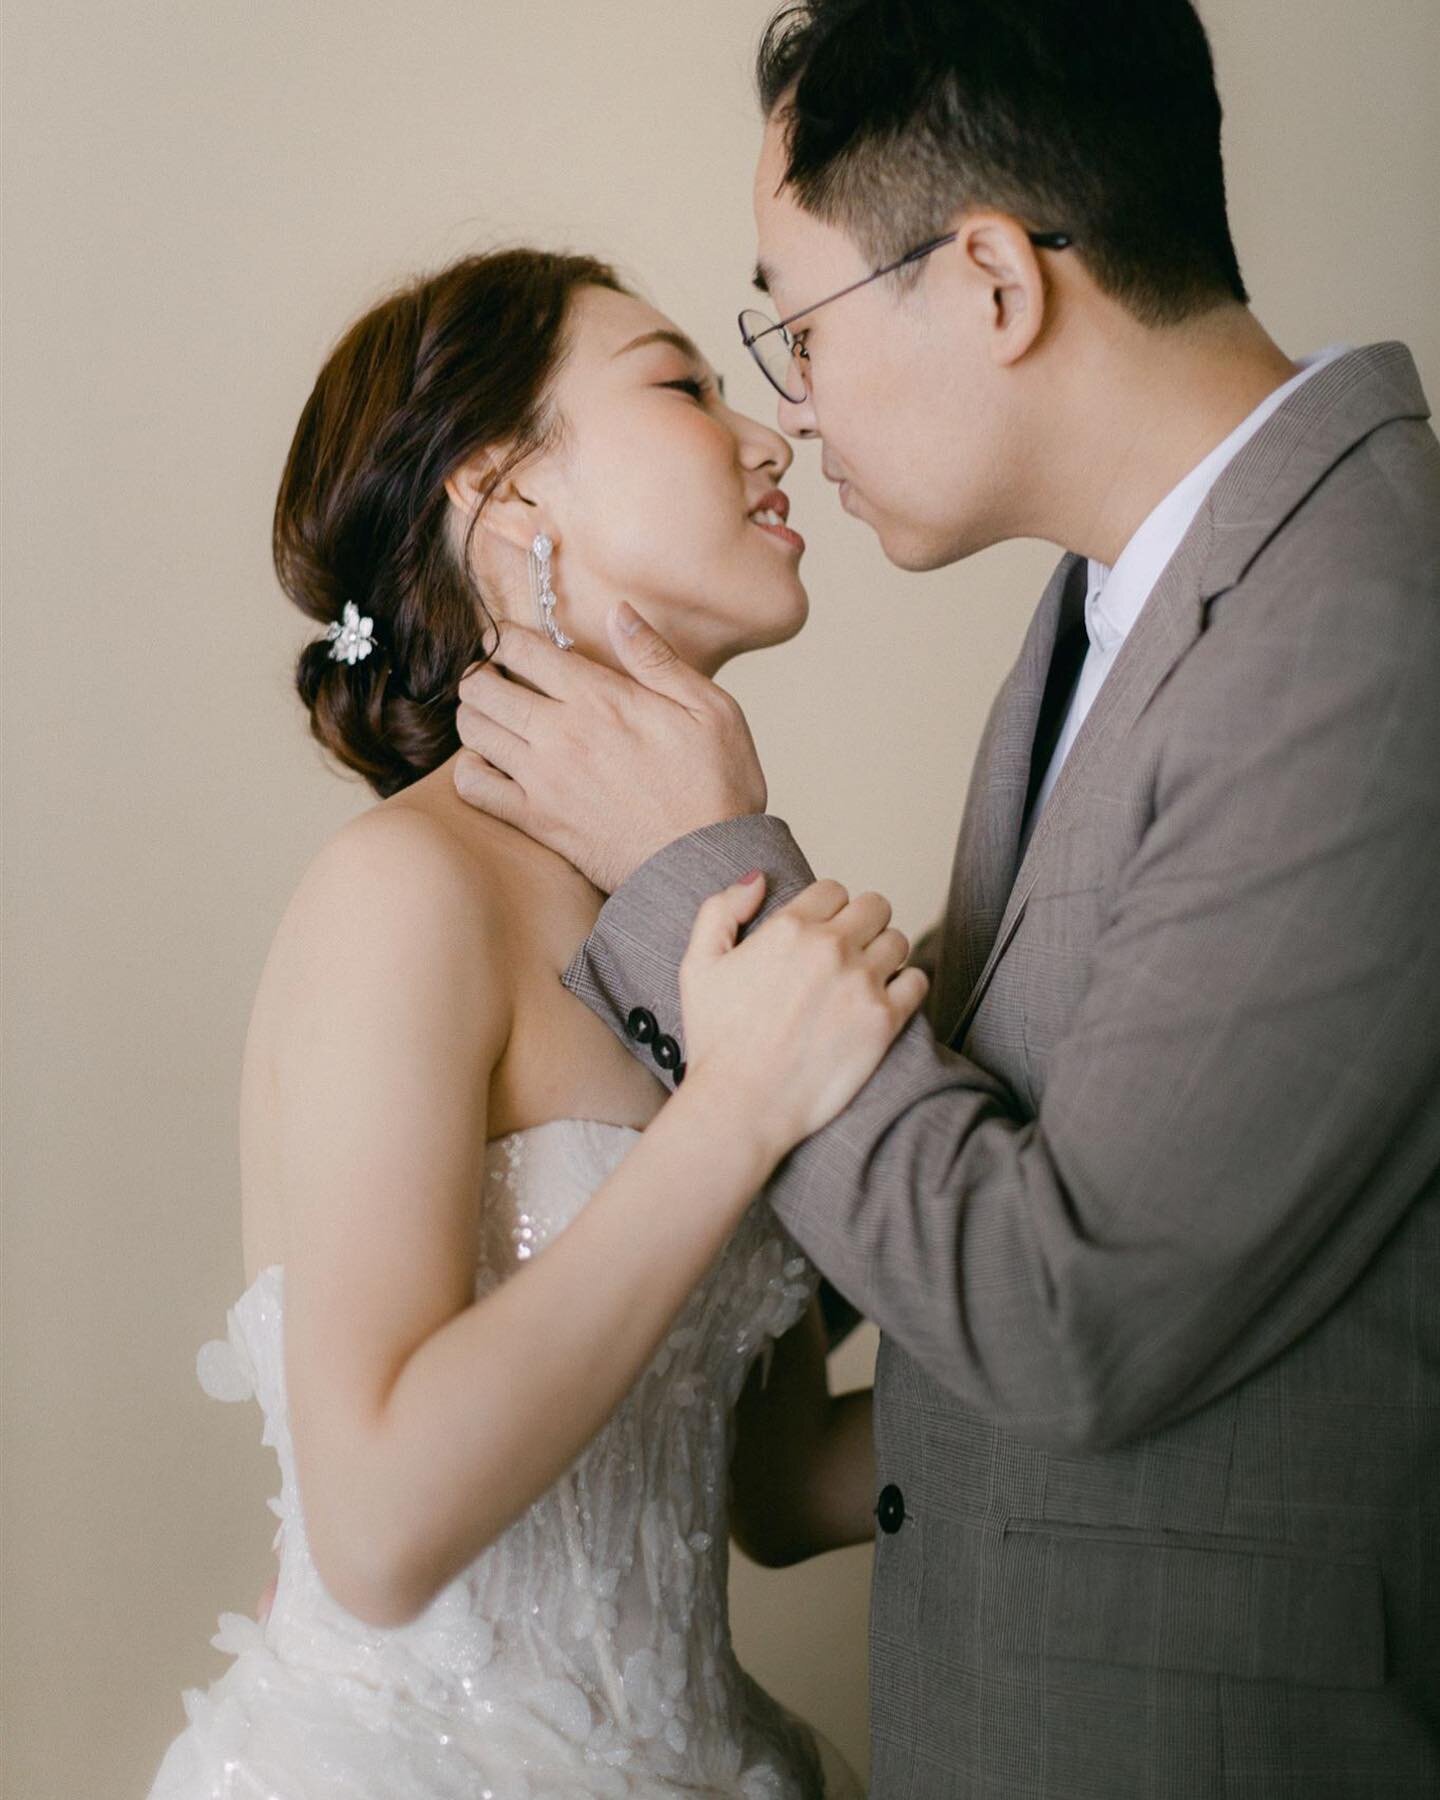 I still get butterflies every time you kiss me. 🧡

#staycationhk 

Couples @queenie.720 @tommy_wong_87 
Photography @blissnblooms 
Hair and Makeup @echo_makeup 
Bridal Accessories @downtheaisleatelier 
.
.
.
.
.
#blissnblooms 
#blissnbloomscouple 
#